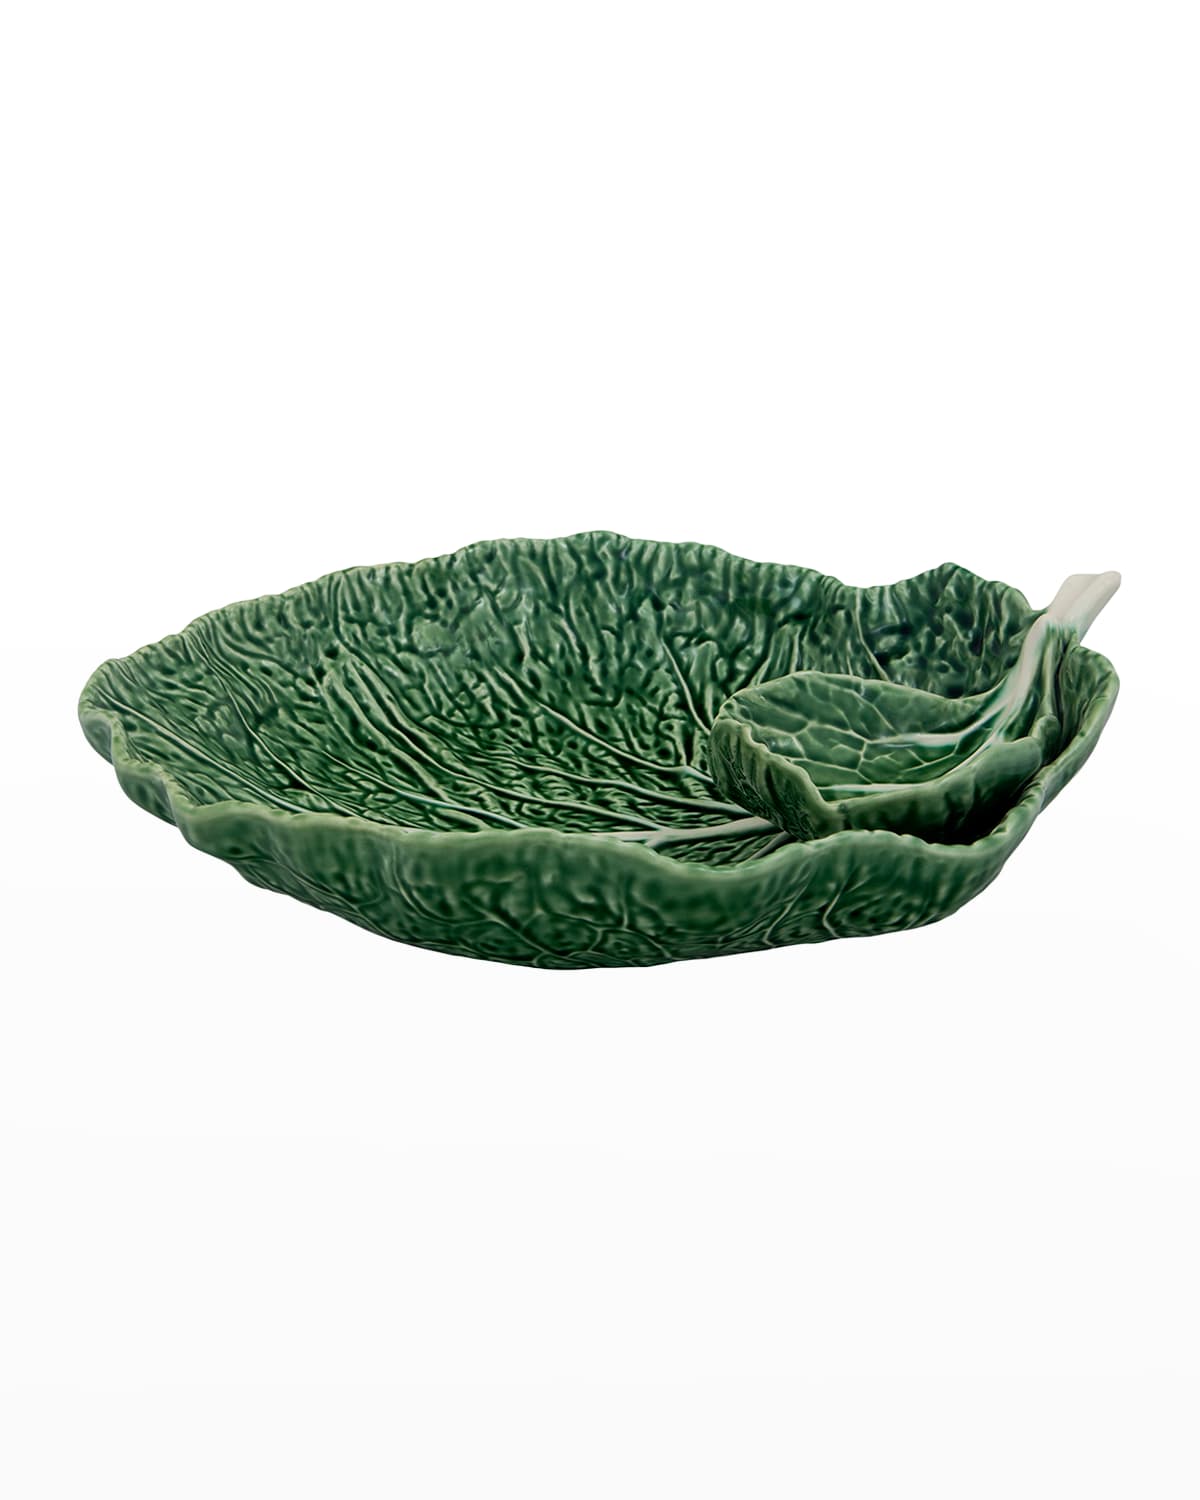 Cabbage Chips and Dip Bowl, Green - 13"